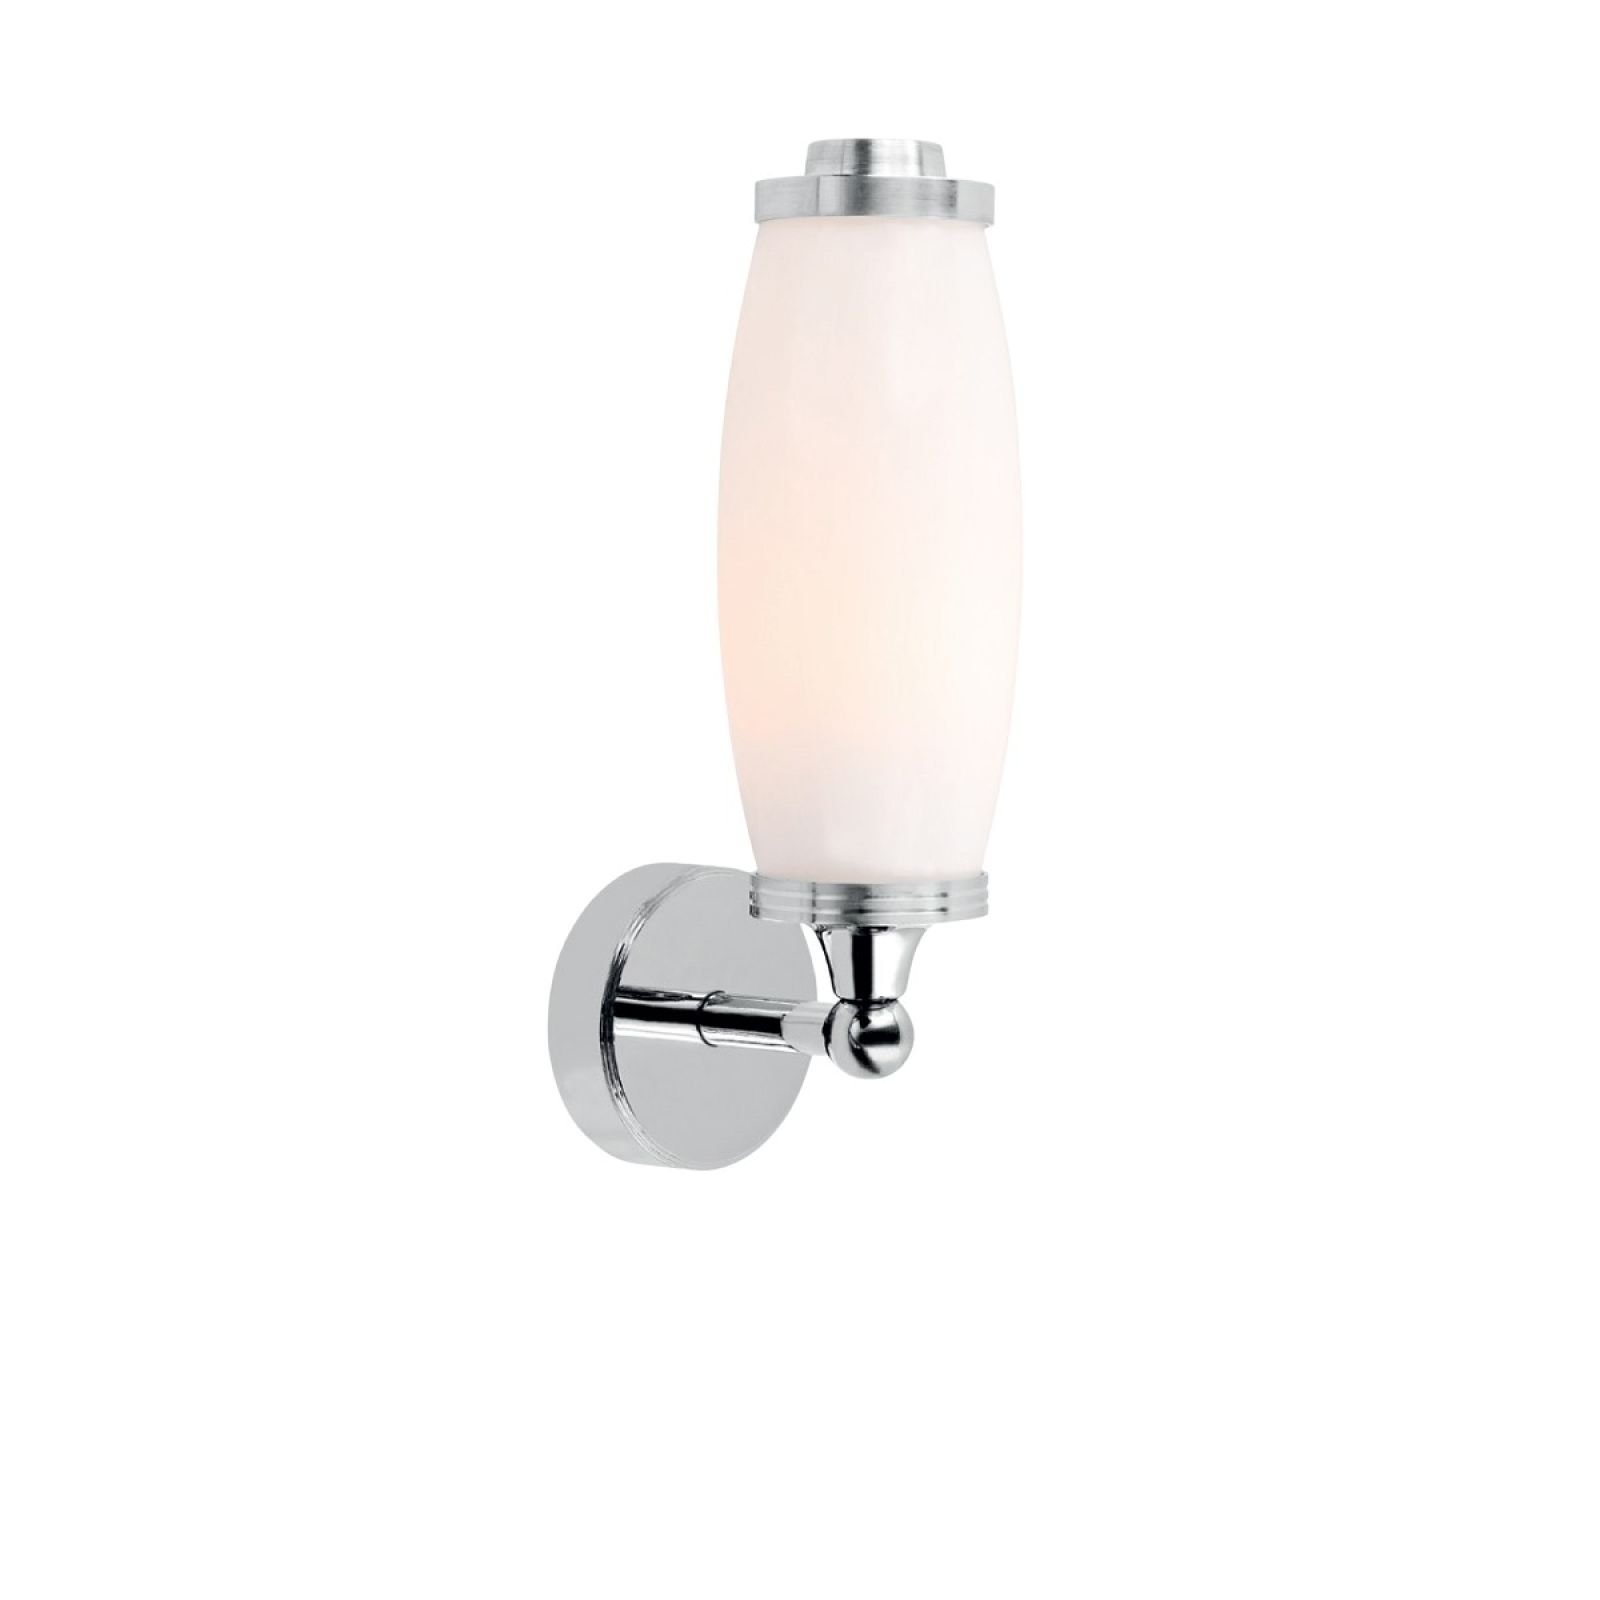 Bathroom wall light in solid brass and chrome or nickel finish